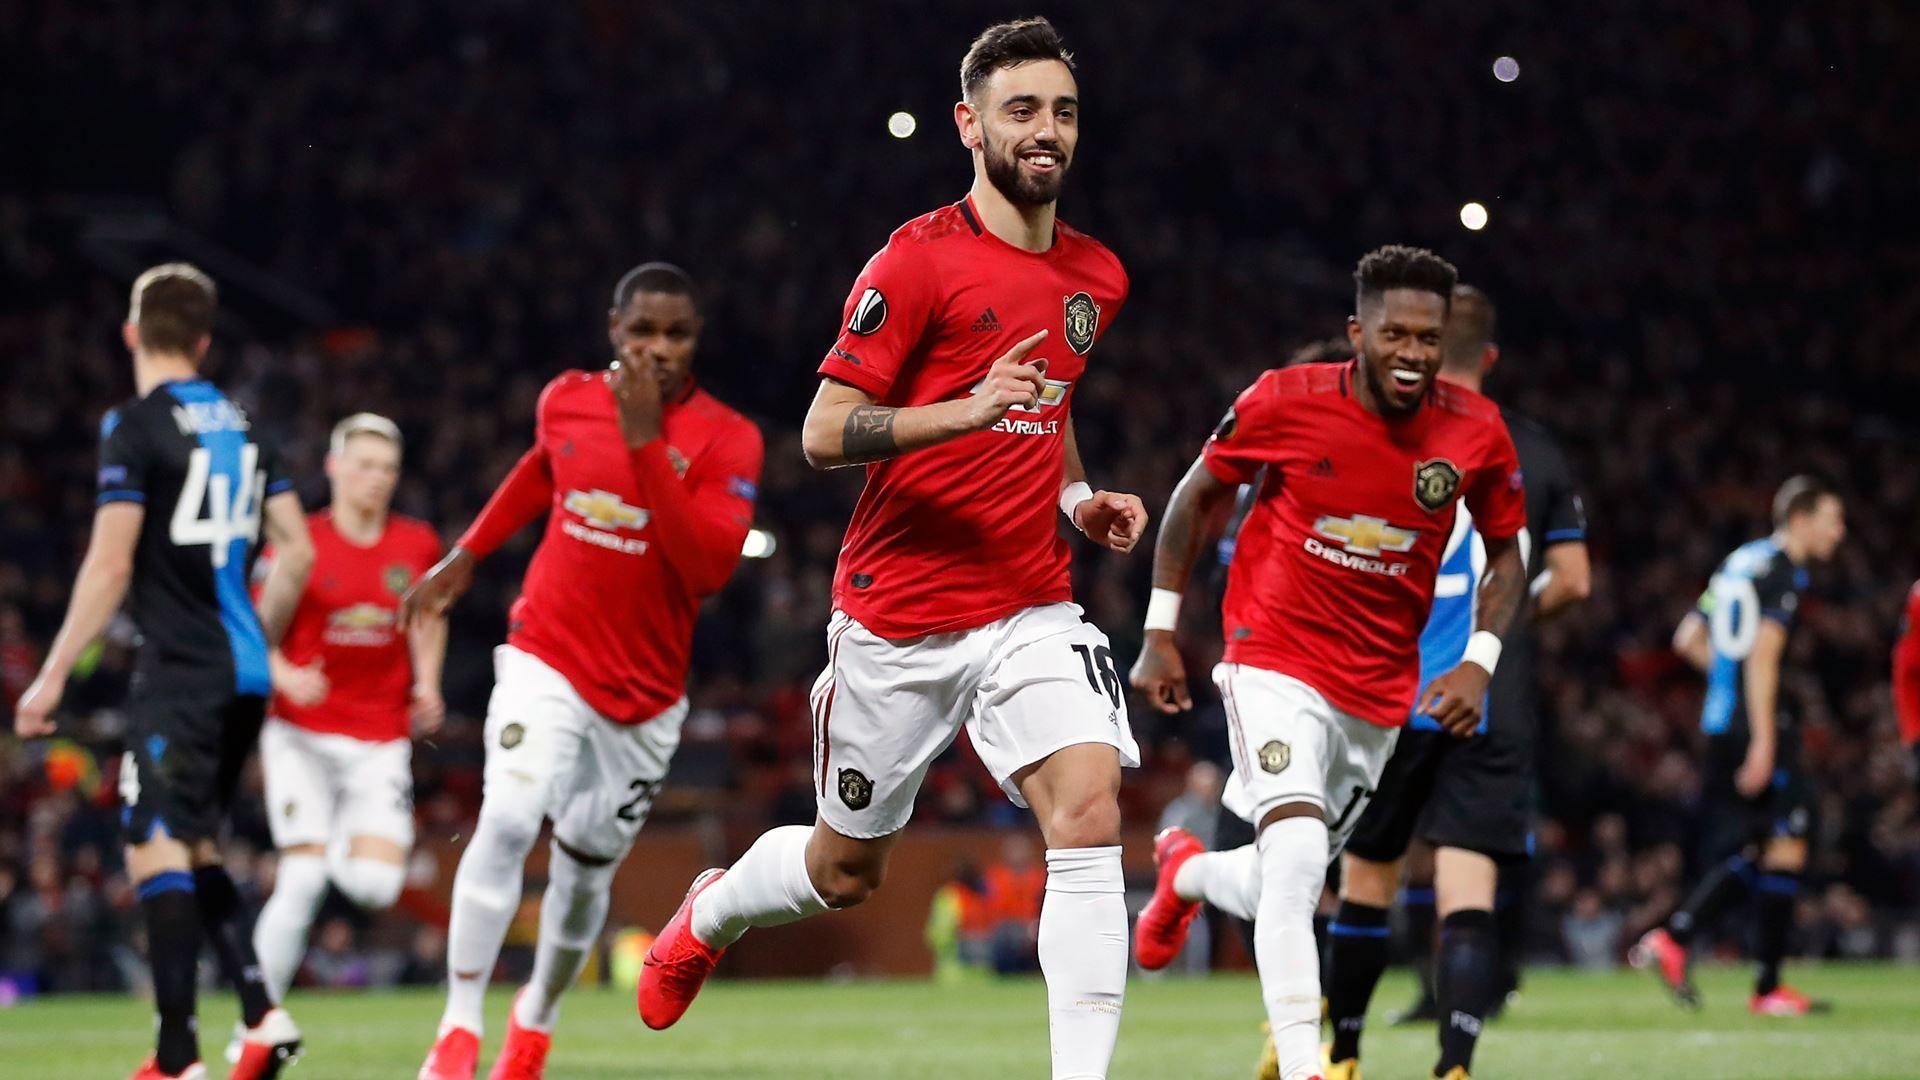 Bruno Fernandes Manchester United Wallpapers - Top Free ...